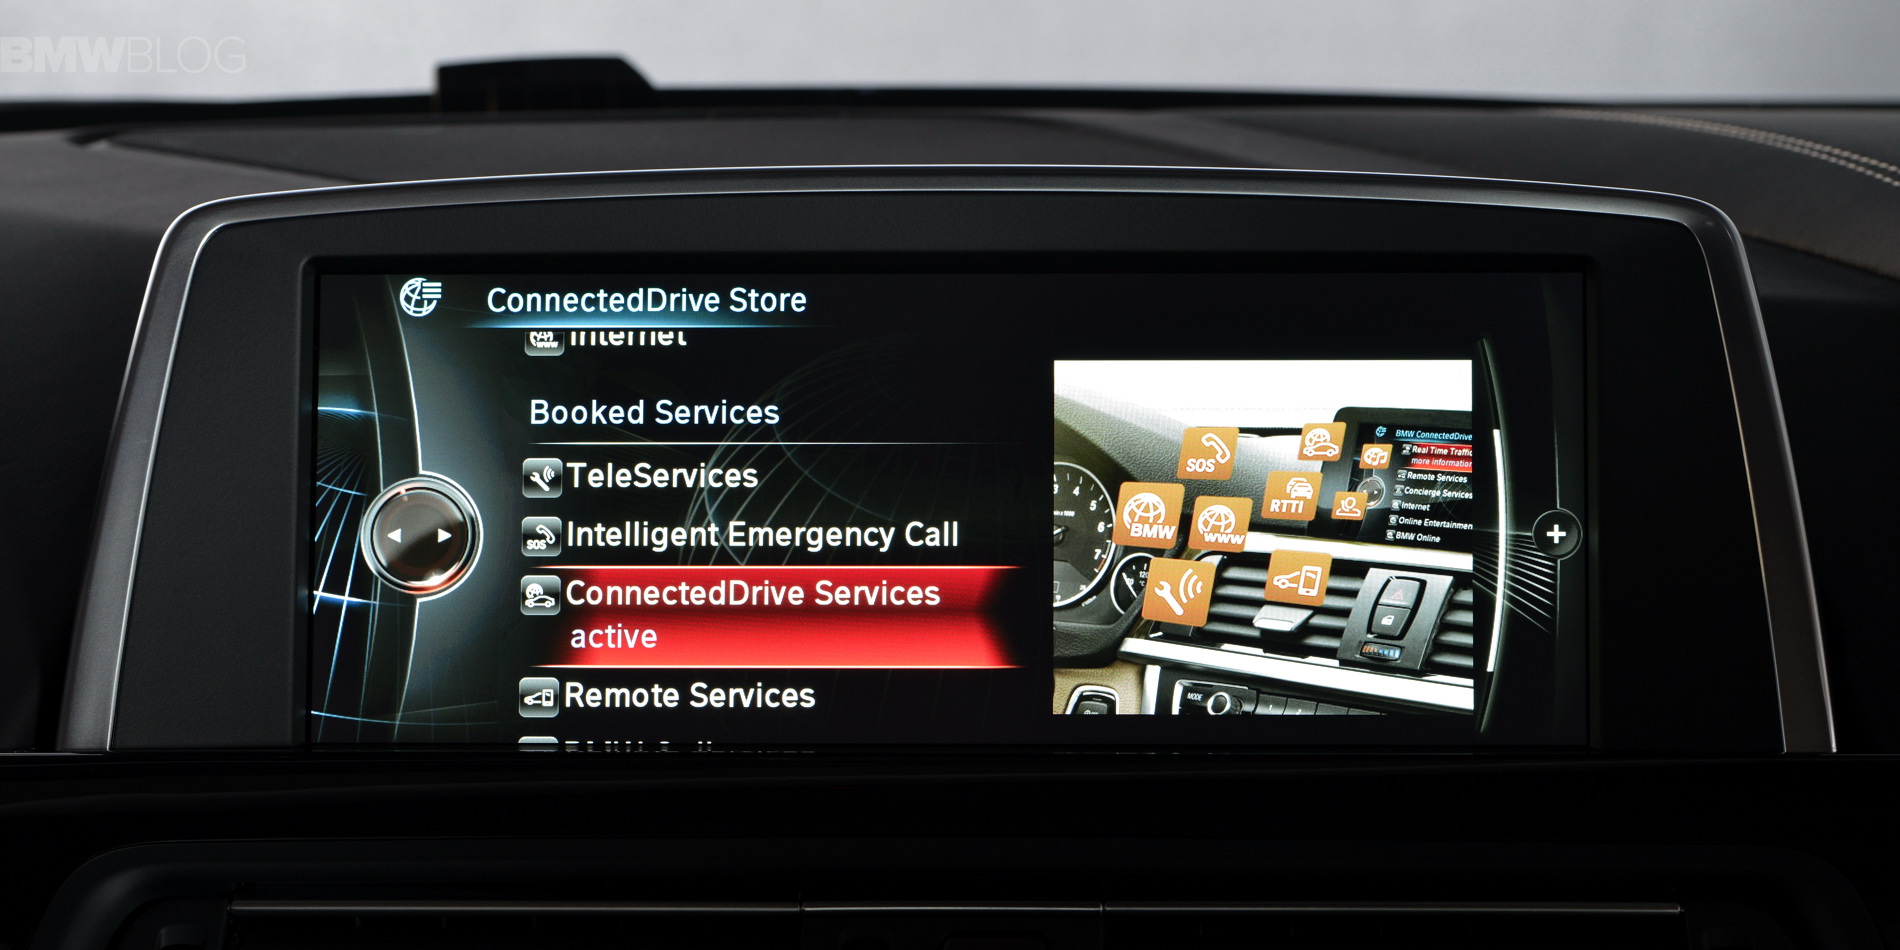 Here is the BMW ConnectedDrive Store